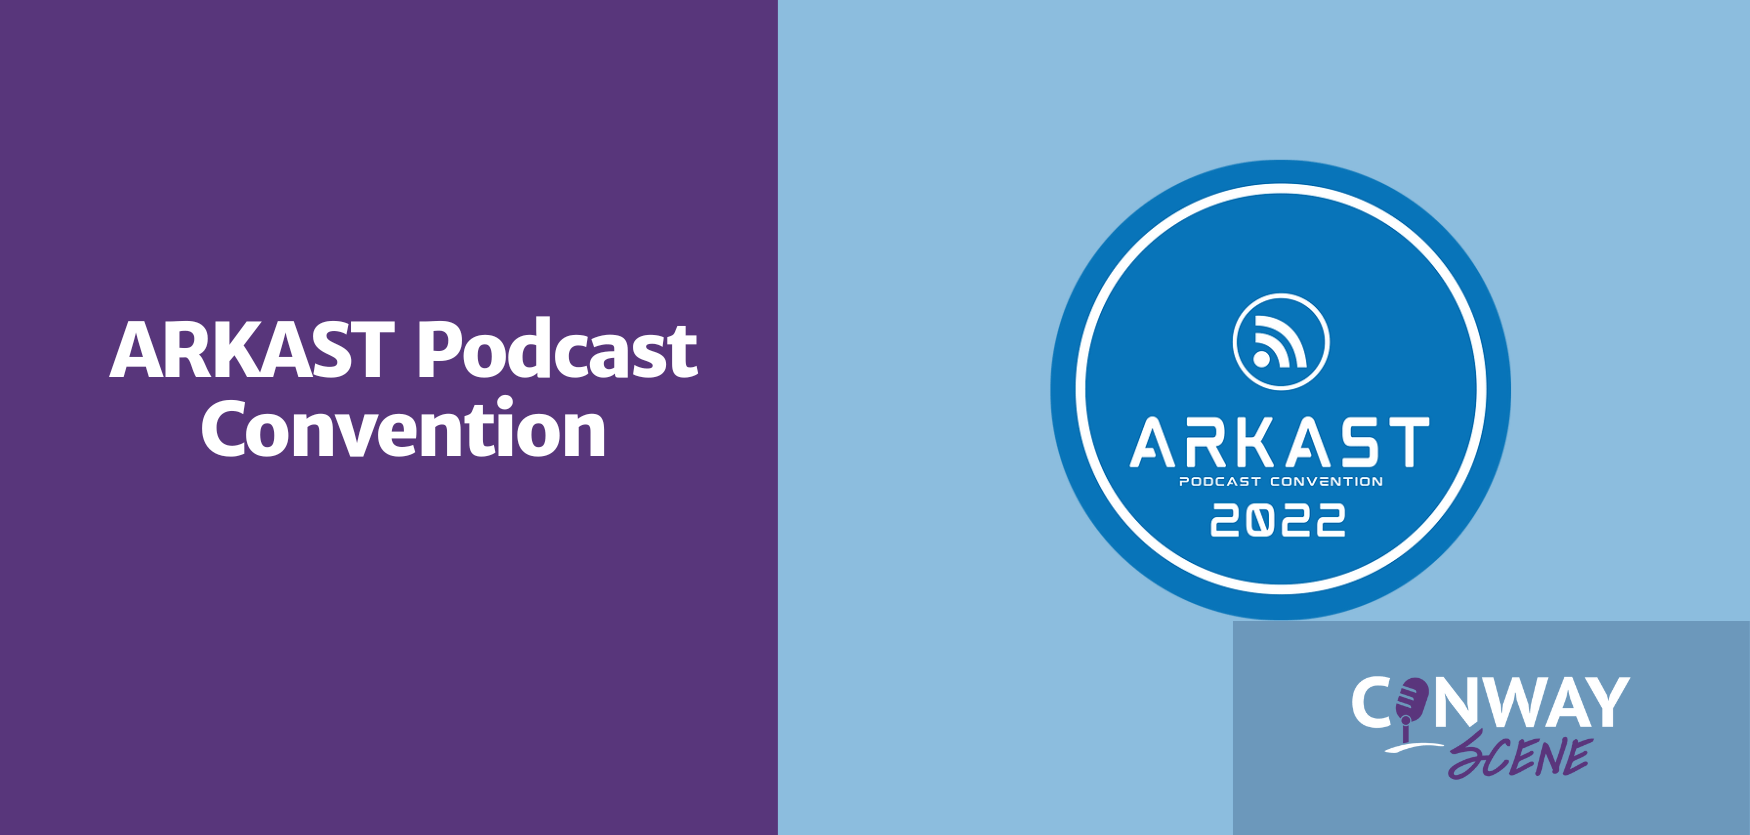 ARKAST Podcast Convention